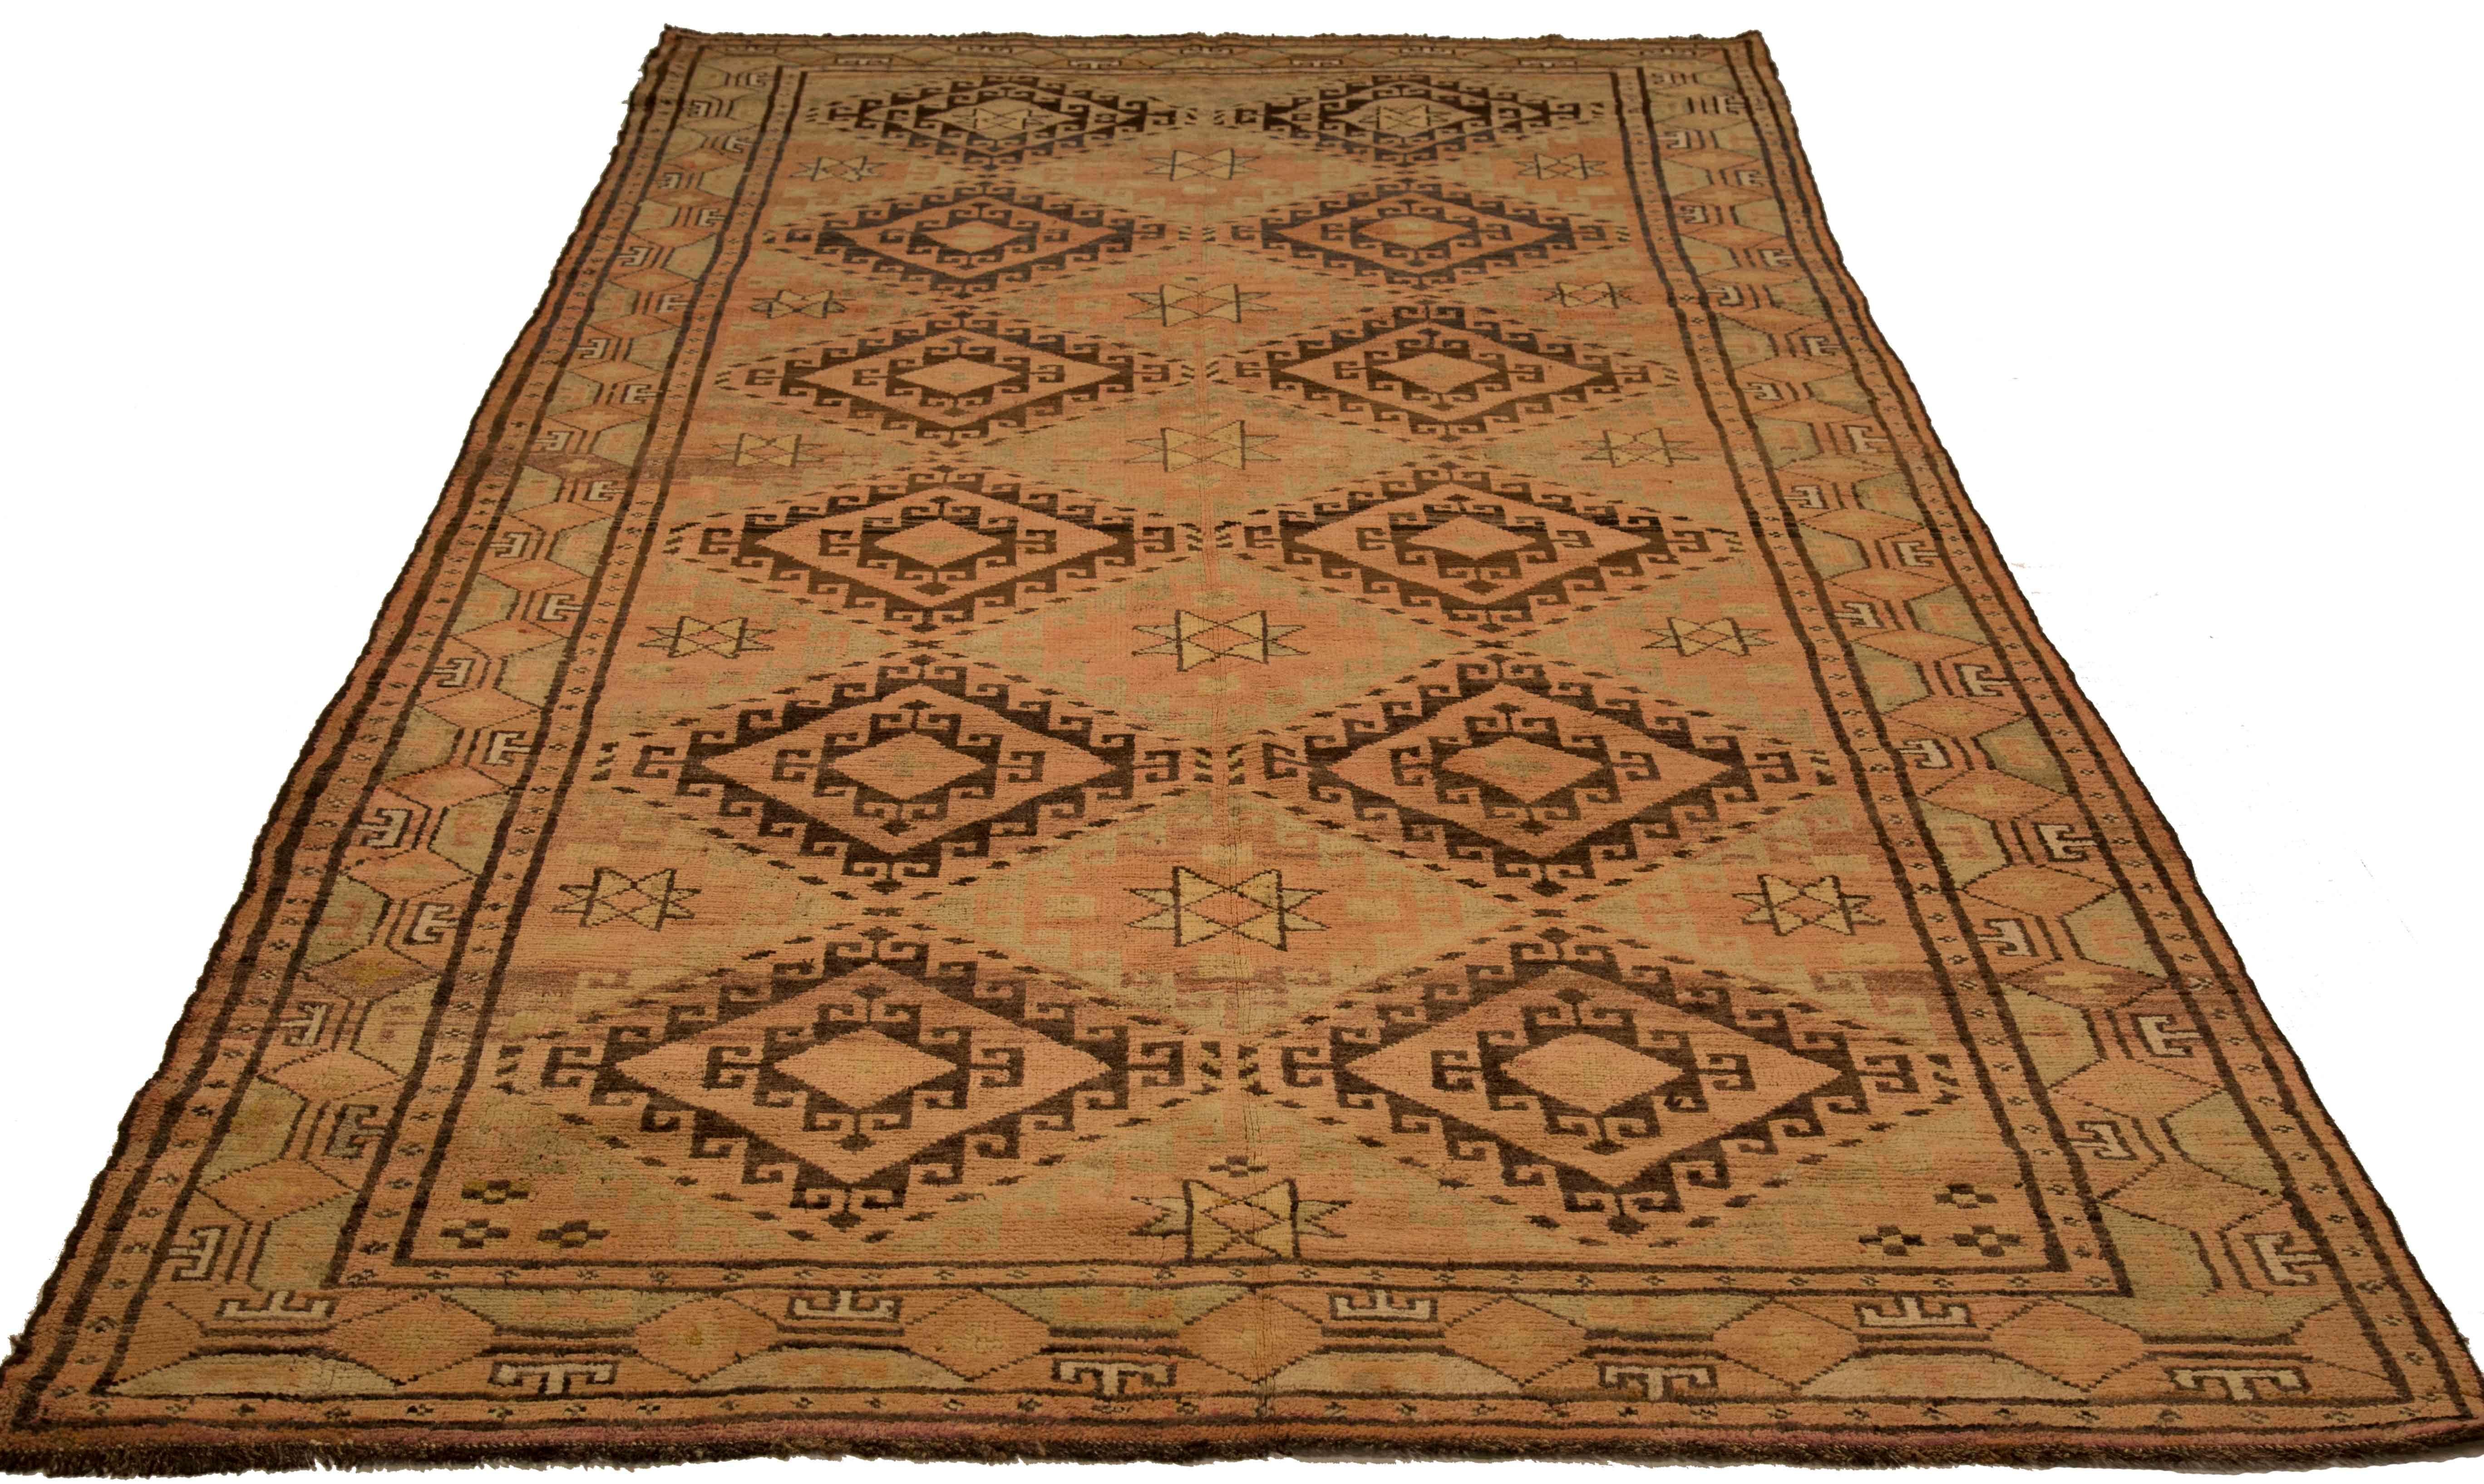 Antique Afghan area rug handwoven from the finest sheep’s wool and colored with all-natural vegetable dyes that are safe for humans and pets. It’s a traditional Afghan design featuring diamond medallions in brown and pink over a beige field. It